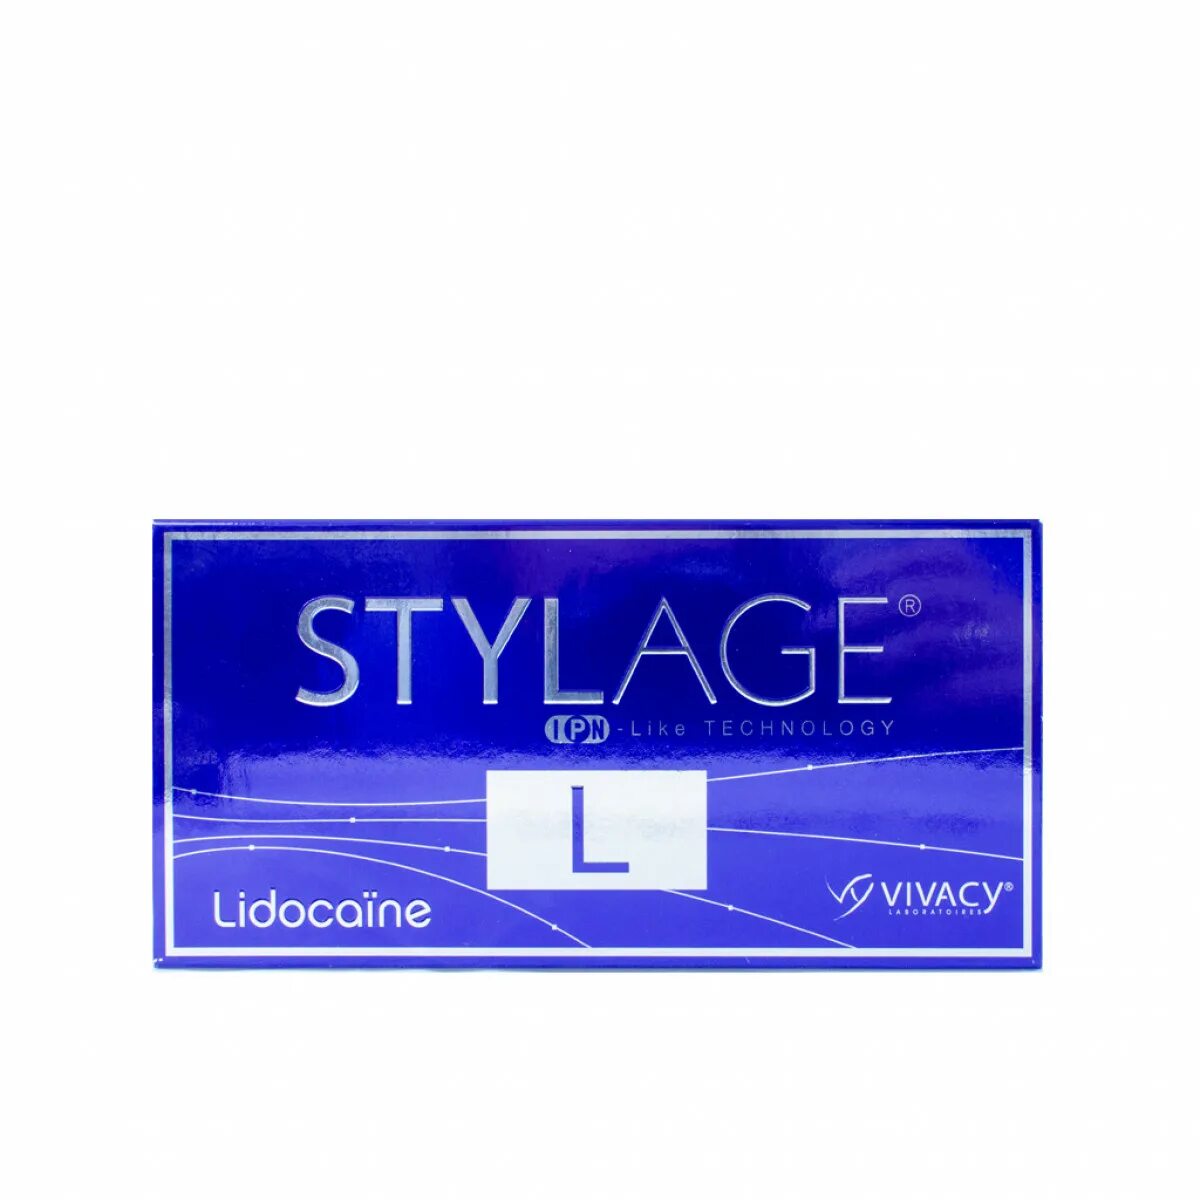 Stylage m цена. Stylage l 1мл. Stylage m (1 мл). Стилаж Stylage филлер. Stylage m филлер 1 ml.